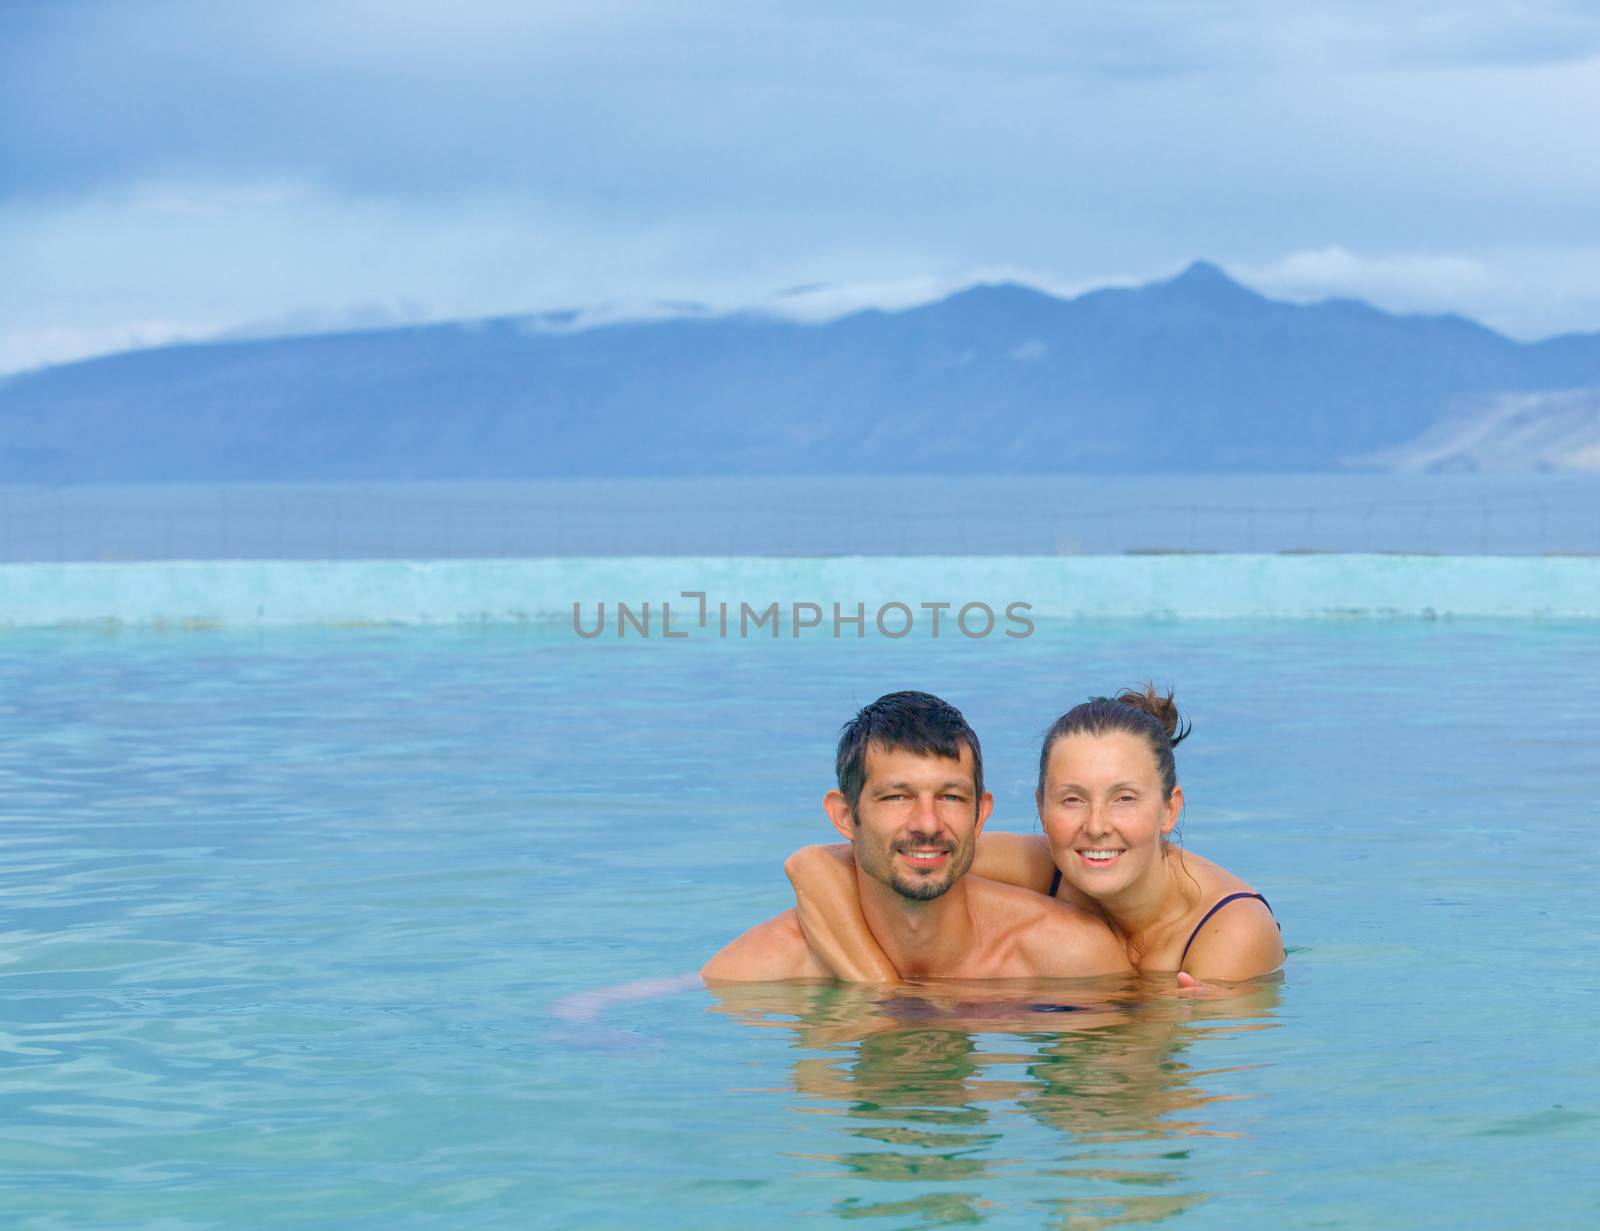 Smiling happy couple in geothermal mineral pool. Iceland